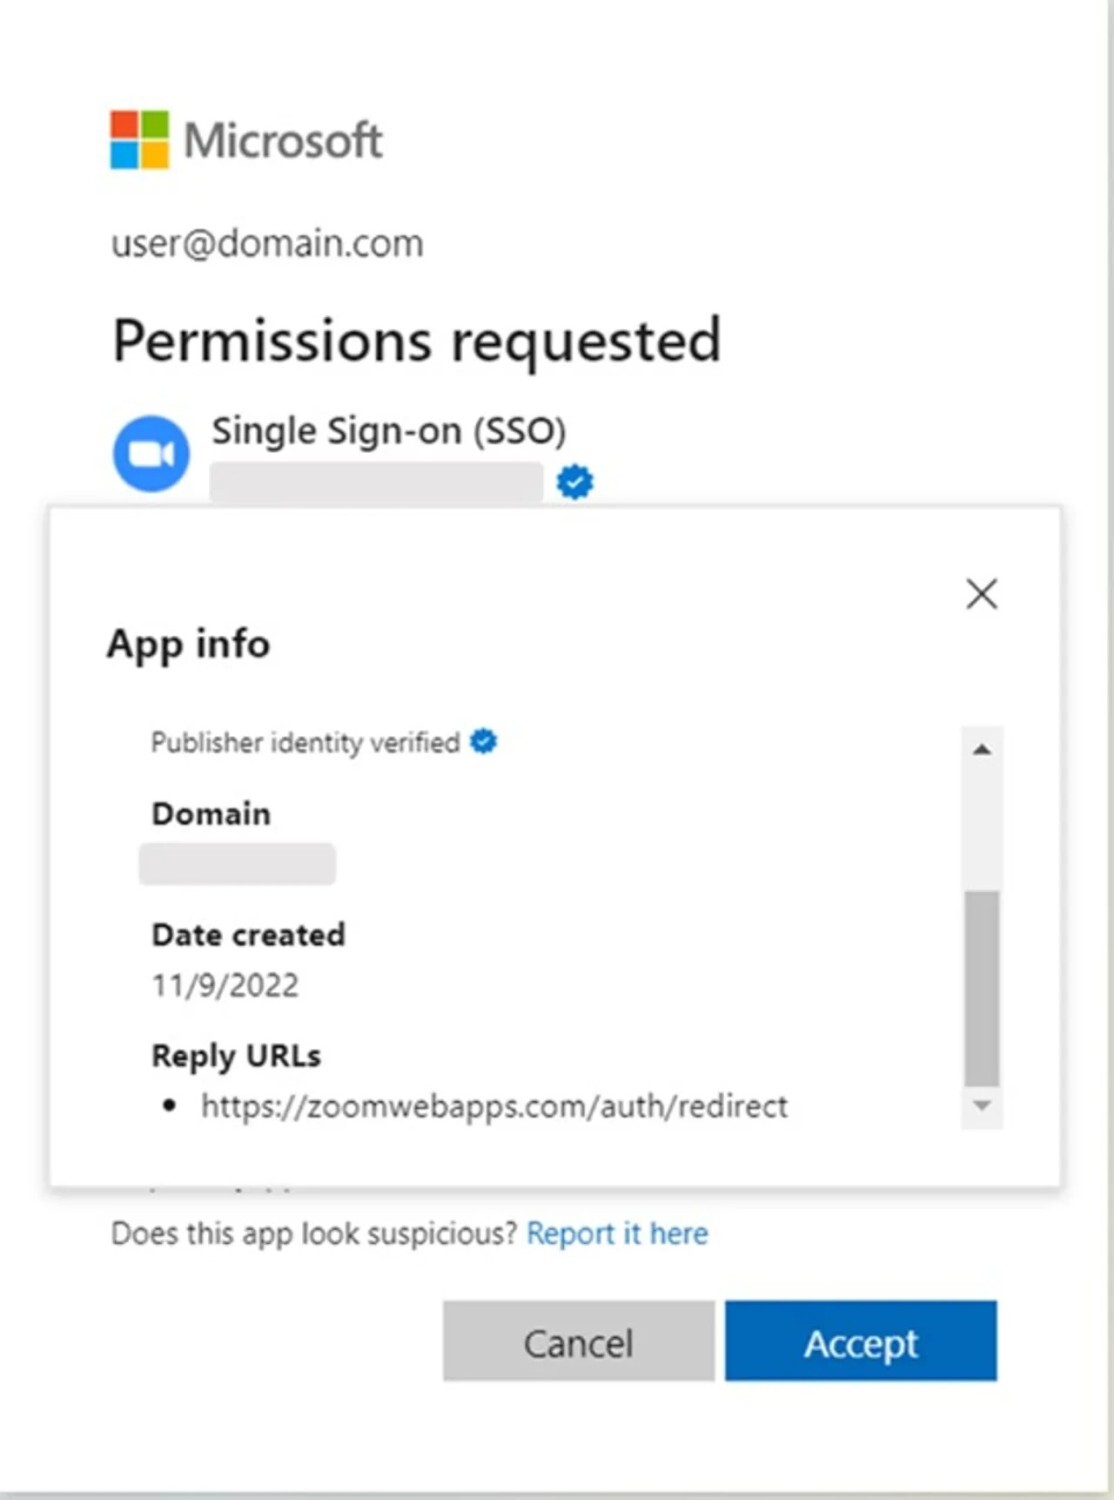 Microsoft asking for permission to login